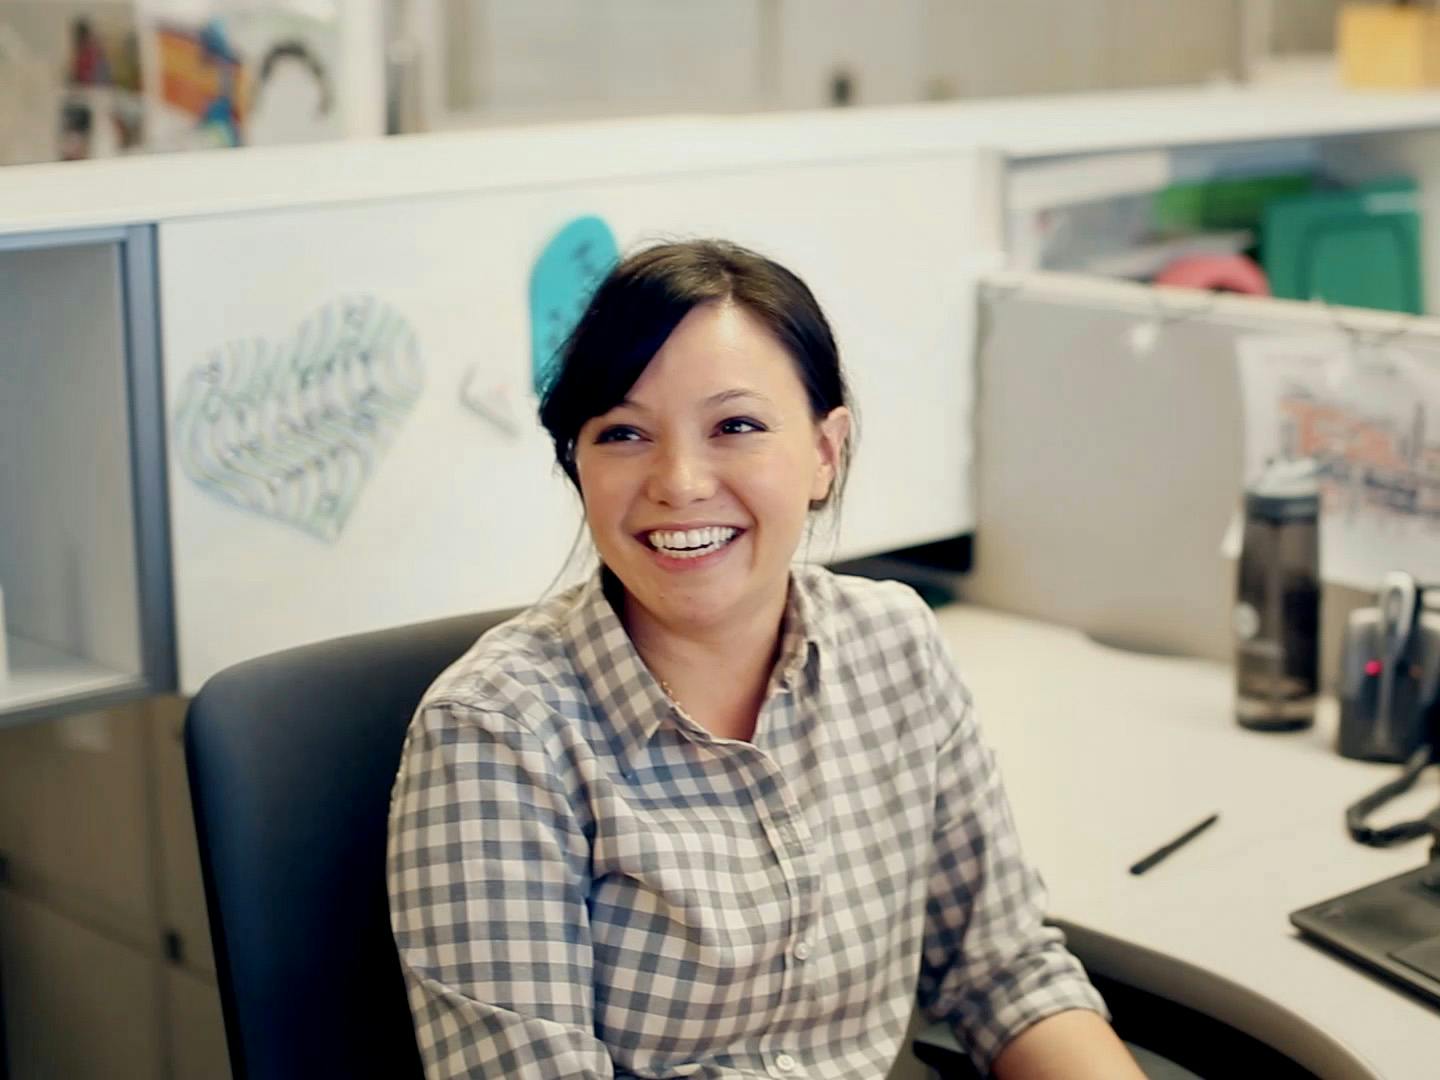 Woman wearing plaid with hair pulled back smiling with her mouth open at her work cubicle. Still from the “SunTrust Momentum OnUp” campaign.